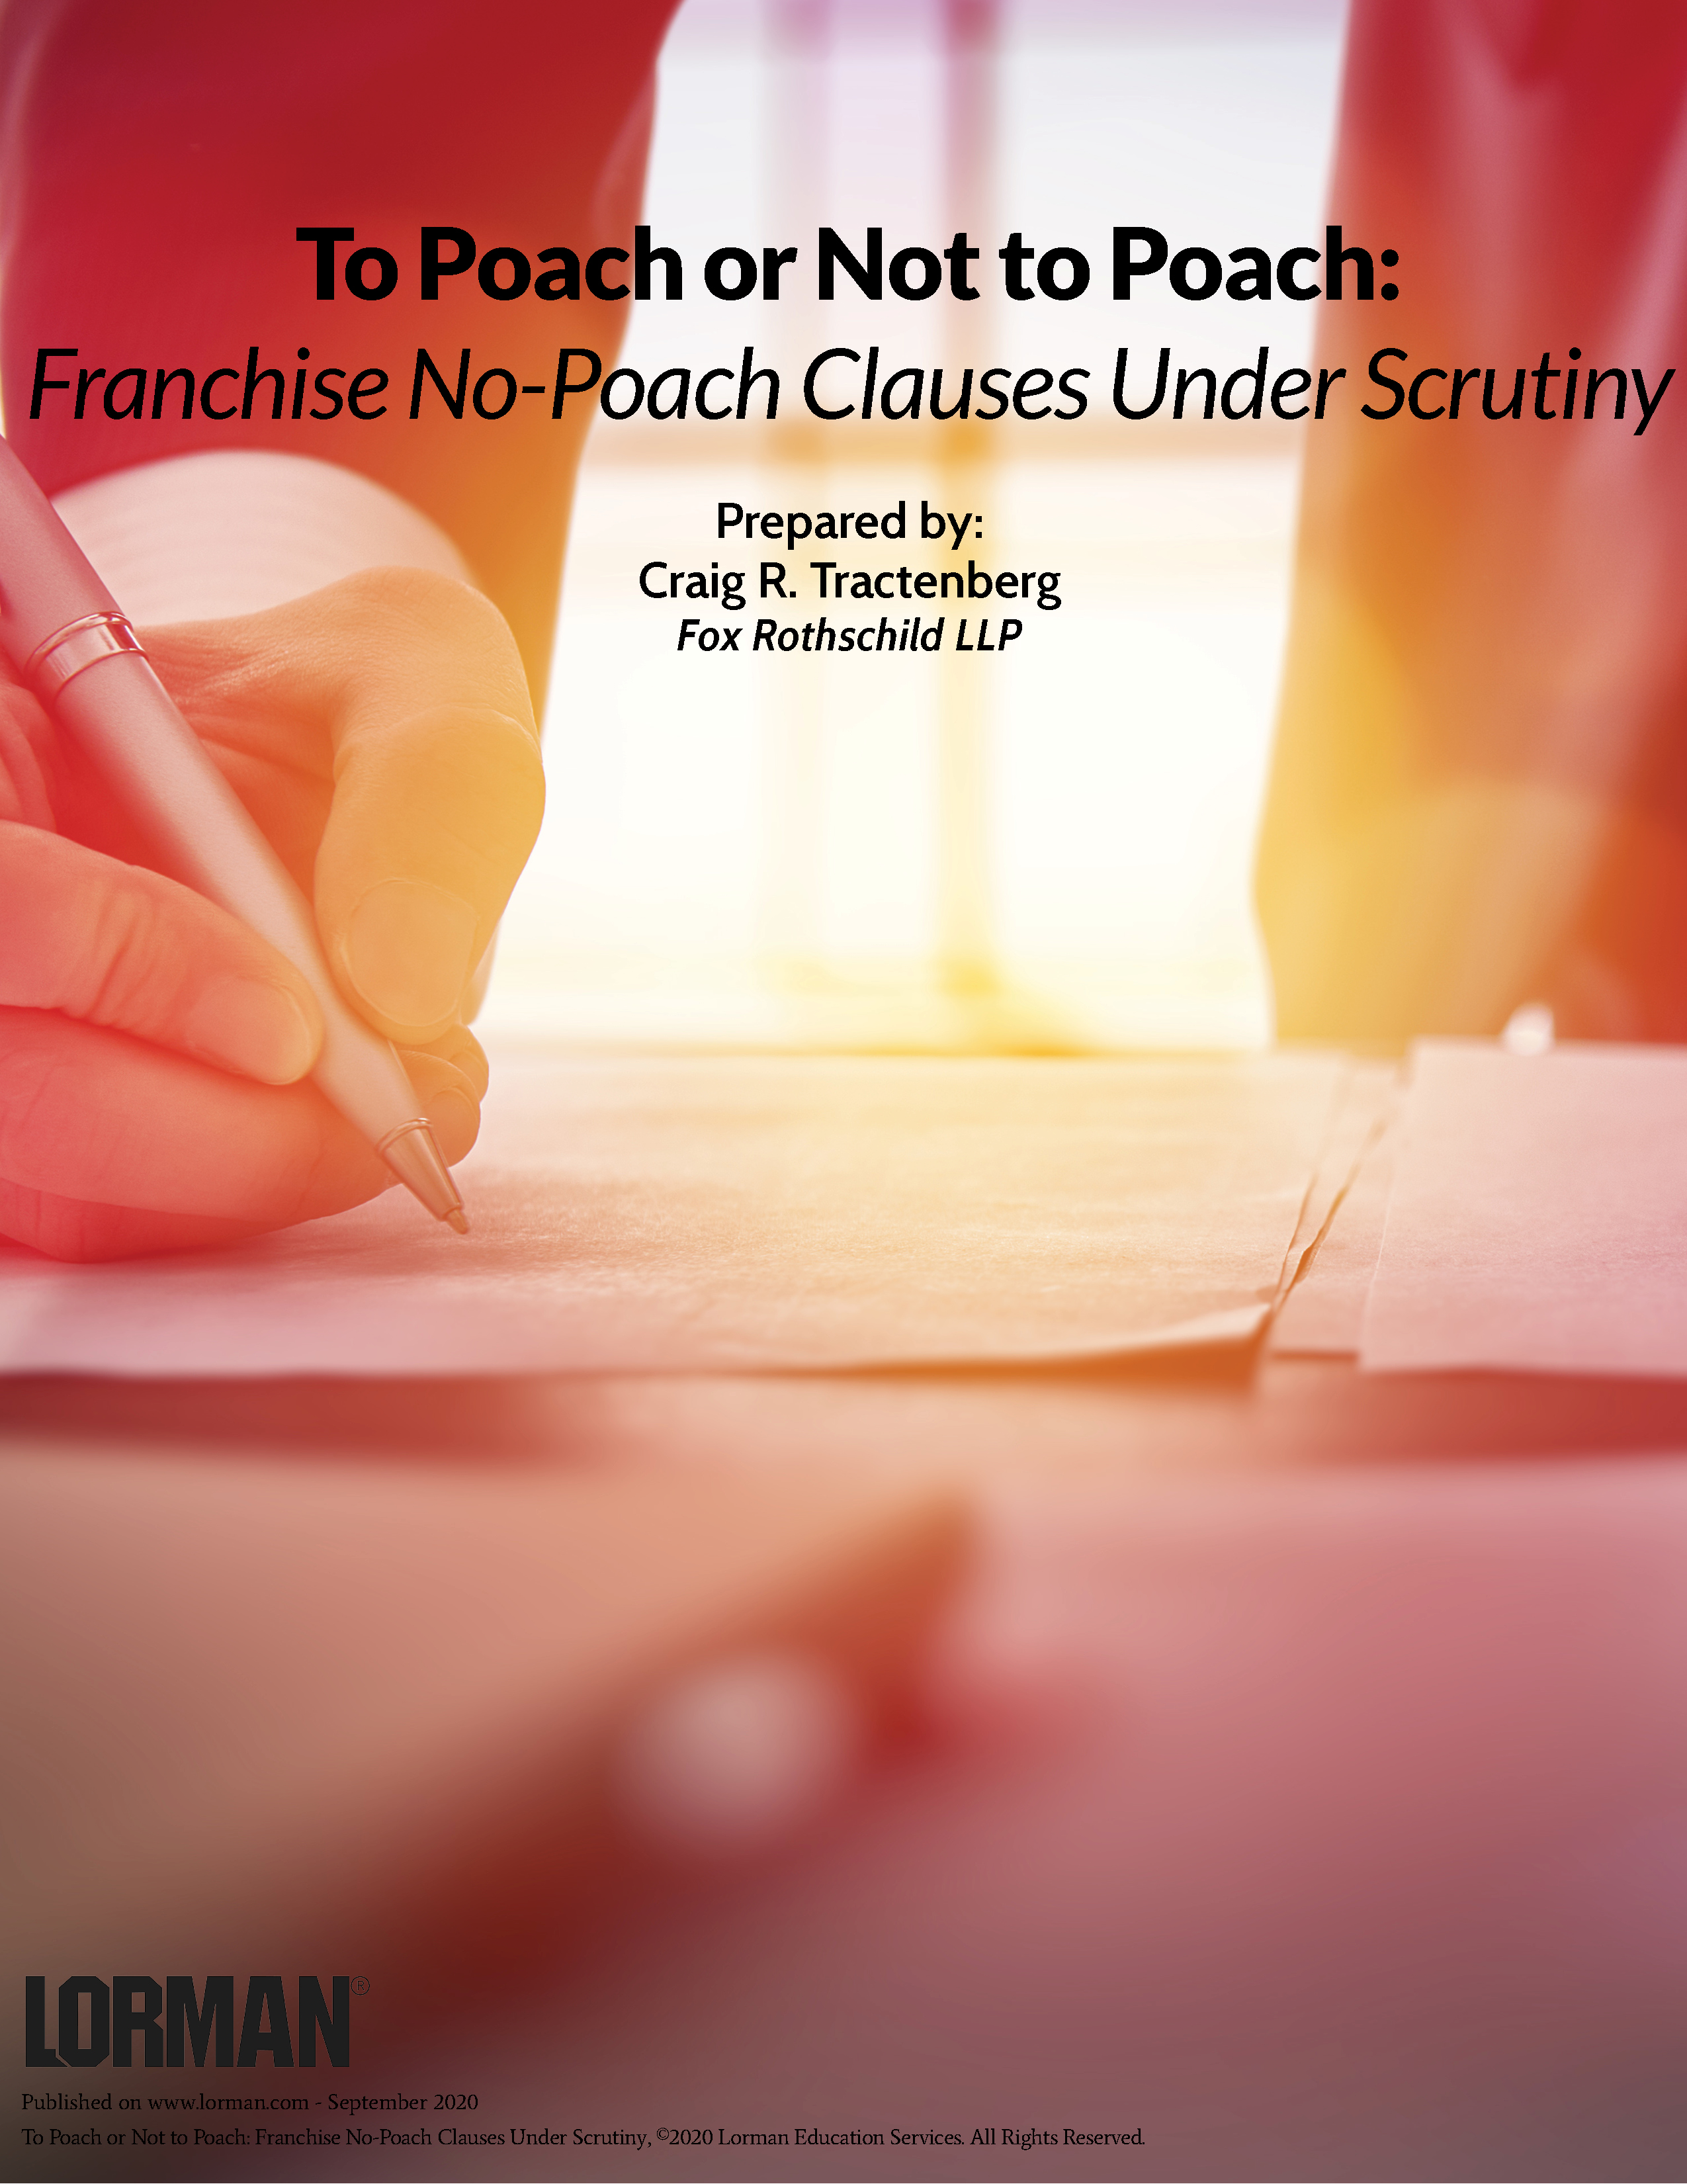 To Poach or Not to Poach: Franchise No-Poach Clauses Under Scrutiny